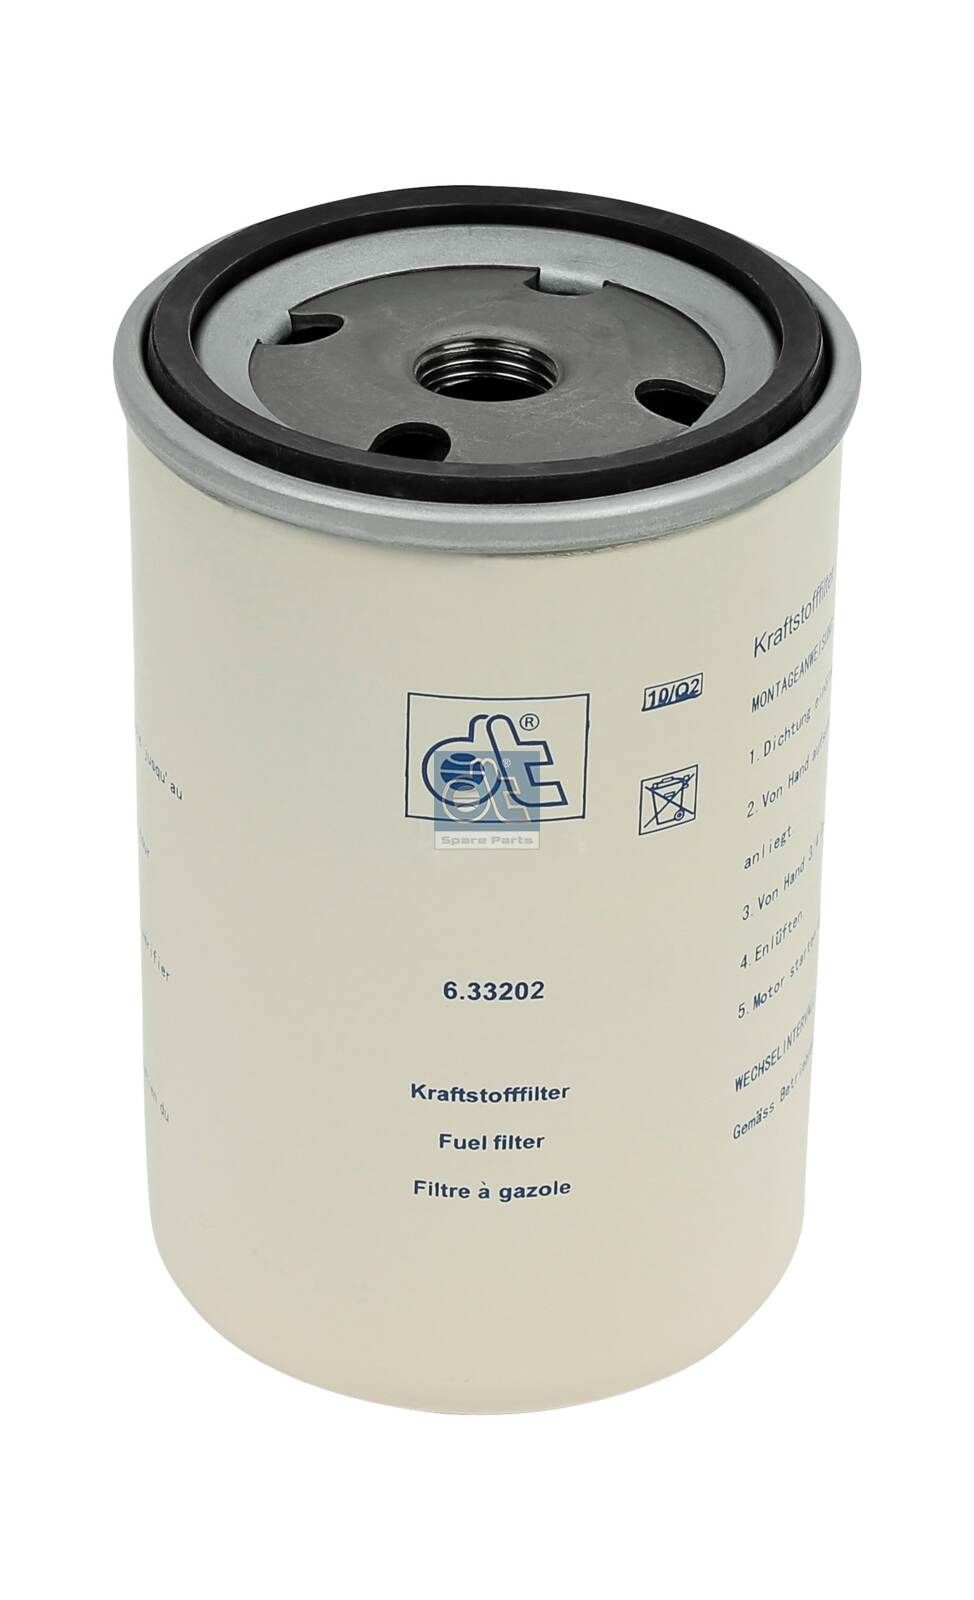 WK 727 DT Spare Parts 6.33202 Fuel filter 5 0411 3074